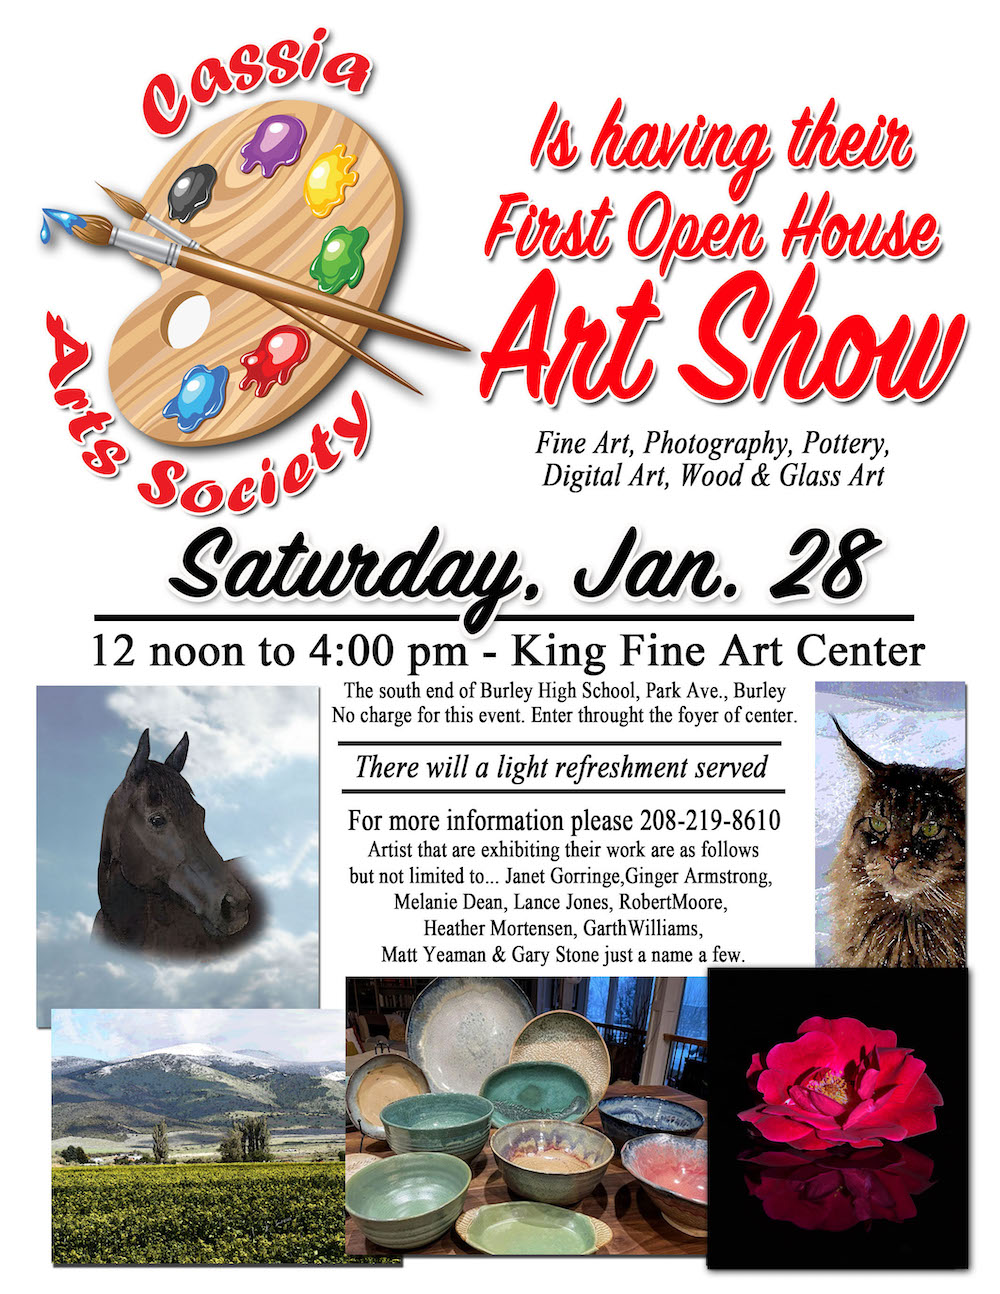 Cassia Arts Society is having their first Open House Art Show: fine art, photography, pottery, digital art, wood & glass art. Saturday January 28 from noon to 4pm at the King Fine Arts Center. Light Refreshment will be served. For more information call 208-219-8610